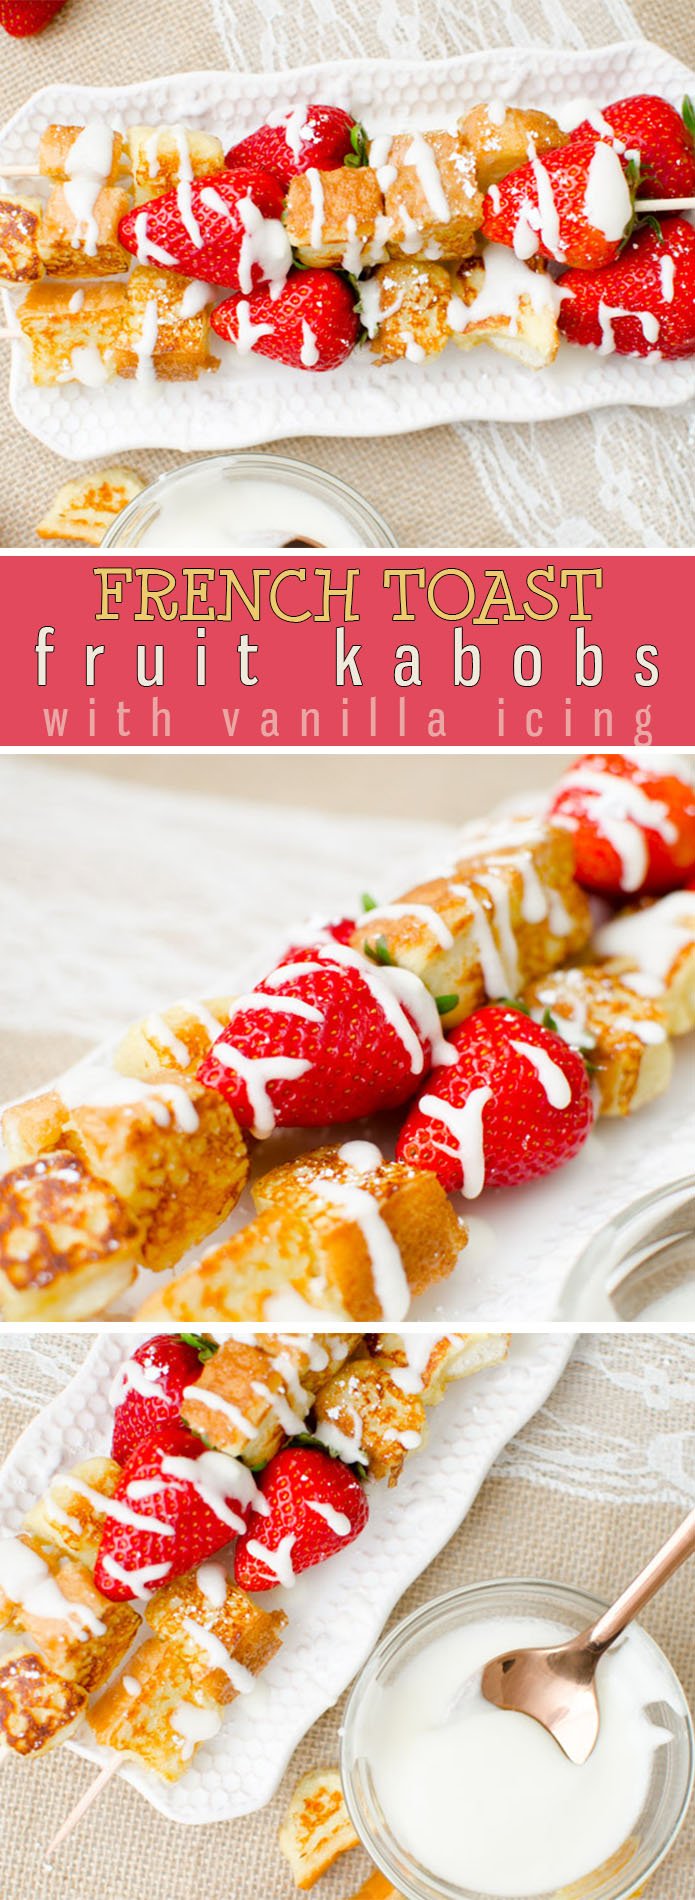 French Toast Fruit Kabobs are perfect French Toast bites stacked onto a kabob with fresh strawberries in between. The French Toast Skewers are finished off with a drizzle of decedent homemade vanilla glaze. These Skewers are perfect for any brunch menu!